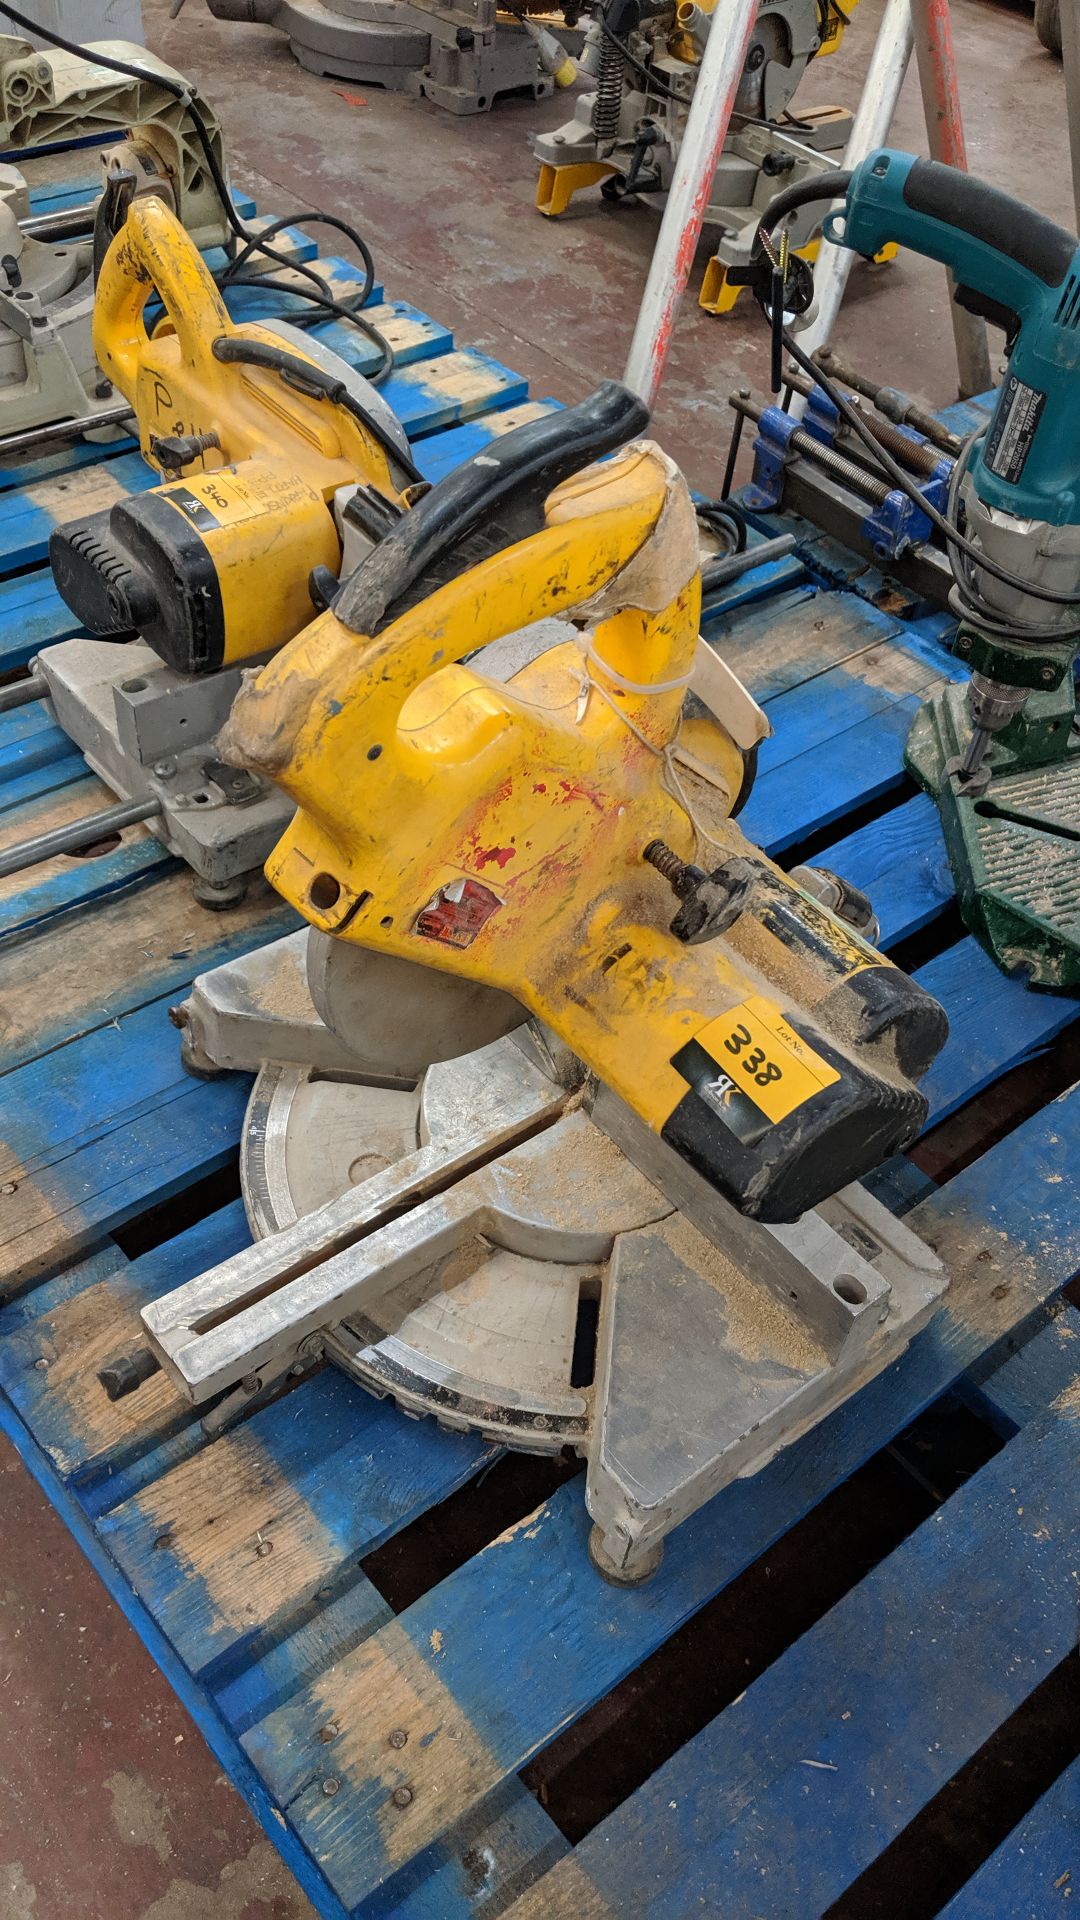 DeWalt 110V mitre saw IMPORTANT: Please remember goods successfully bid upon must be paid for and